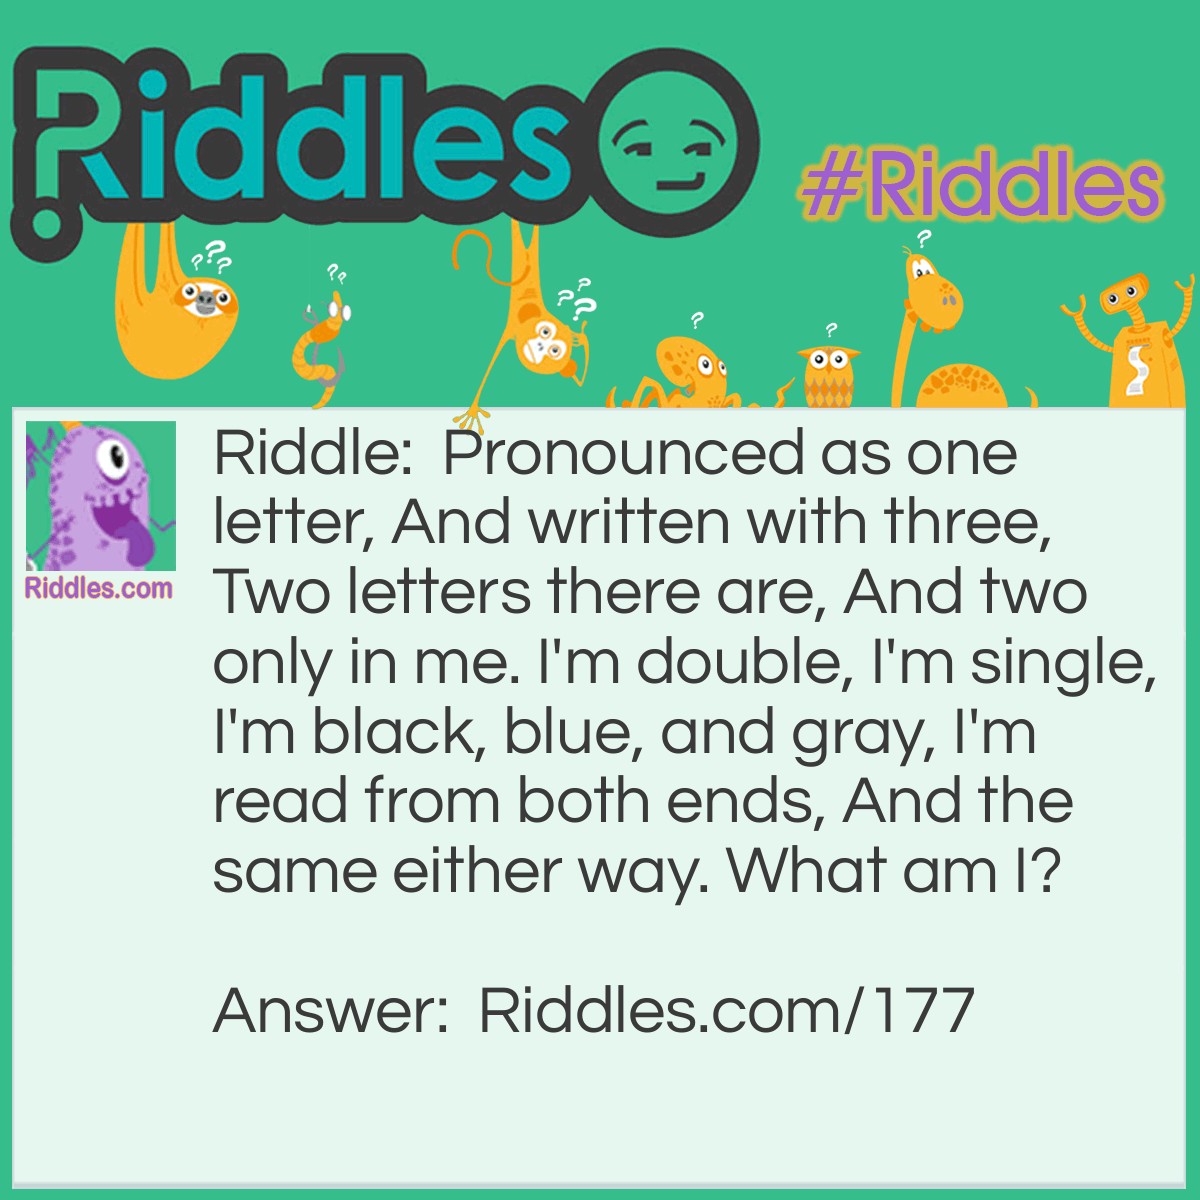 Riddle: Pronounced as one letter, And written with three, Two letters there are, And two only in me. I'm double, I'm single, I'm black, blue, and gray, I'm read from both ends, And the same either way. What am I? Answer: An eye.